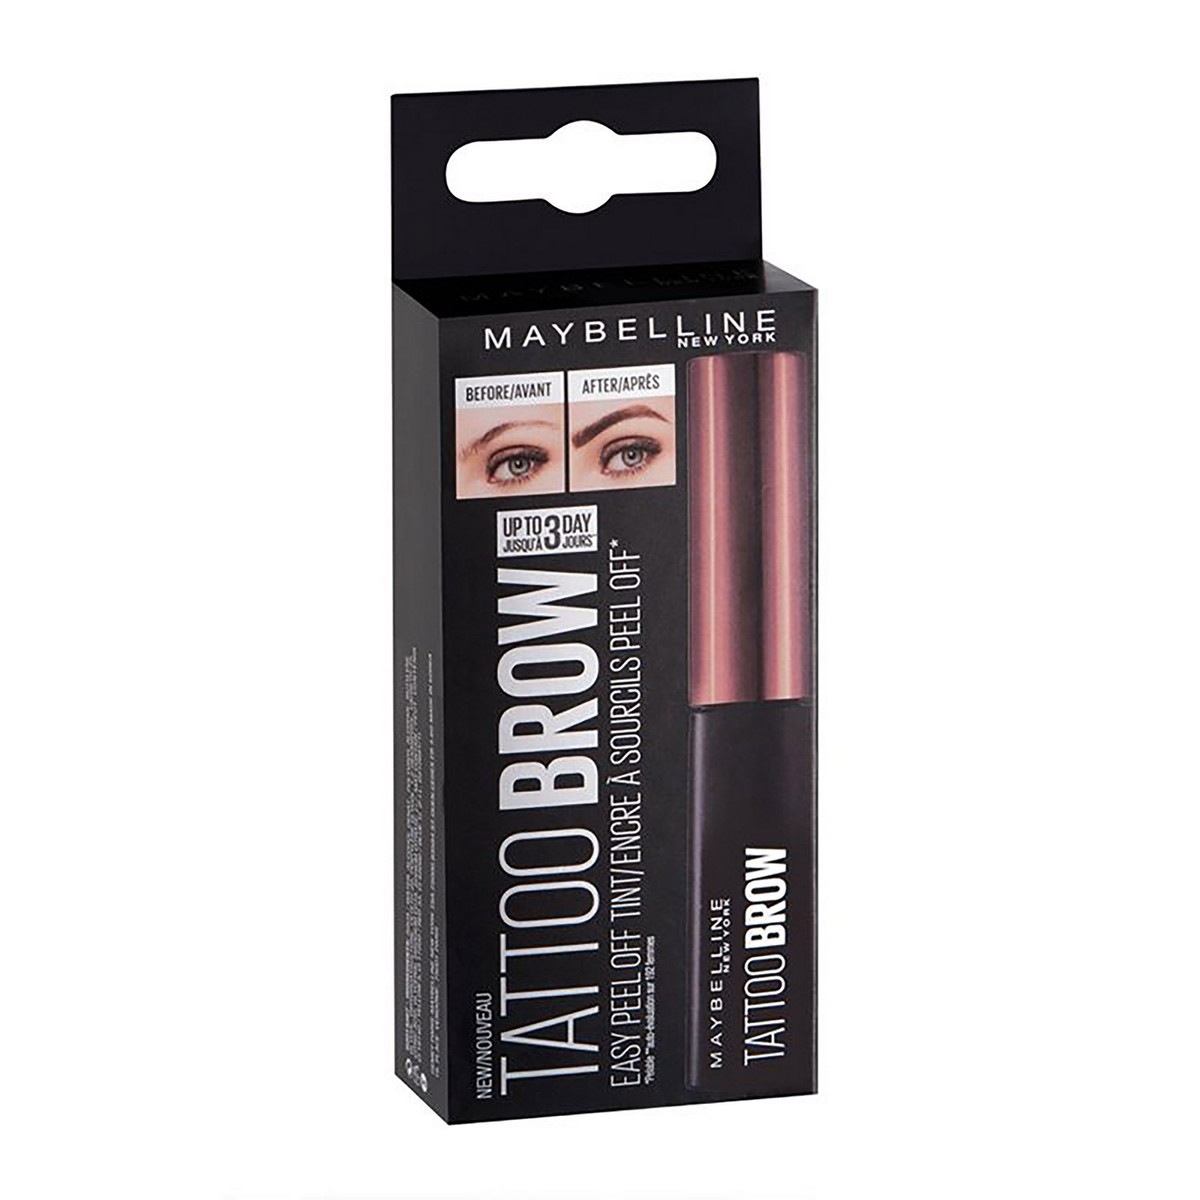 MAYBELLINE NEW YORK Tattoo Brow 36H Brow Pencil Grey Brown 025gm  Price  in India Buy MAYBELLINE NEW YORK Tattoo Brow 36H Brow Pencil Grey Brown  025gm Online In India Reviews Ratings